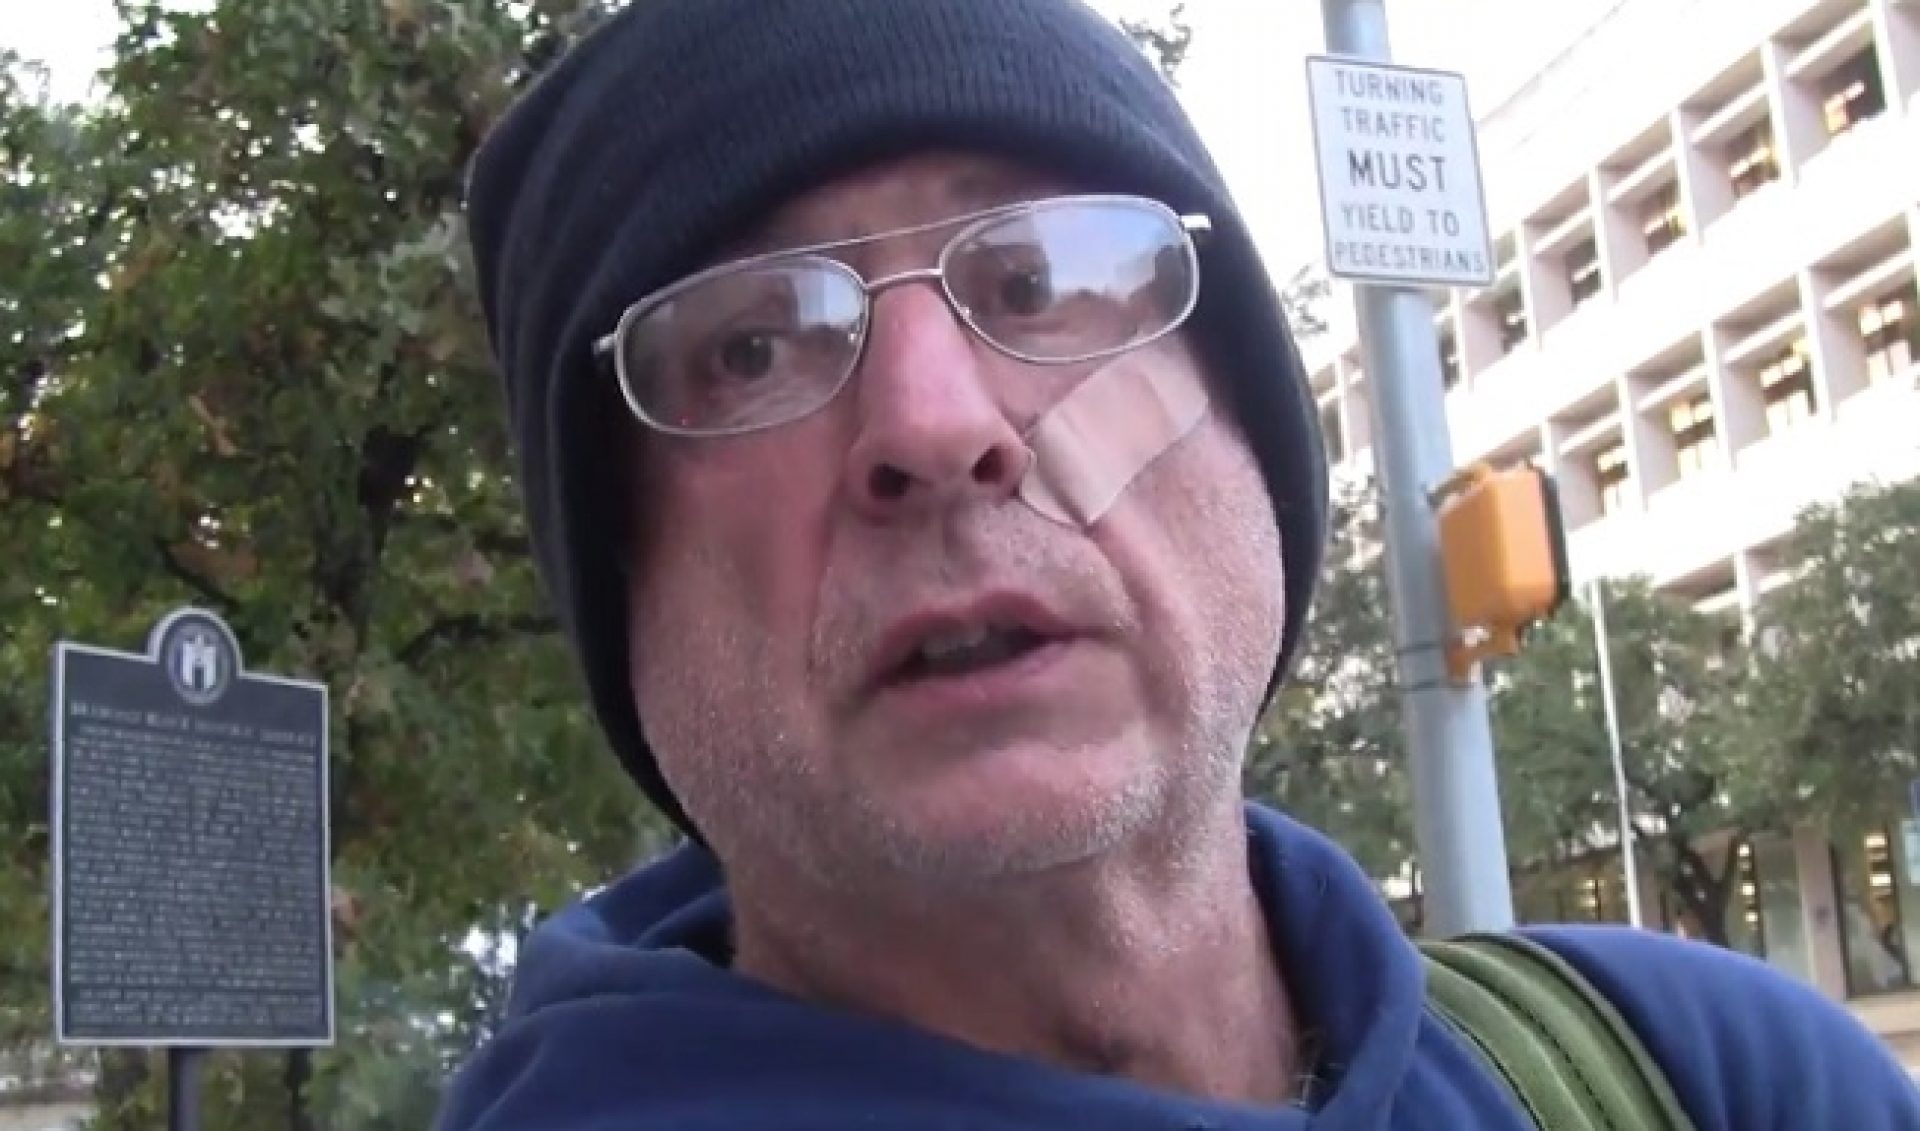 Homeless Austin Man Vlogs About His Daily Life On The Streets